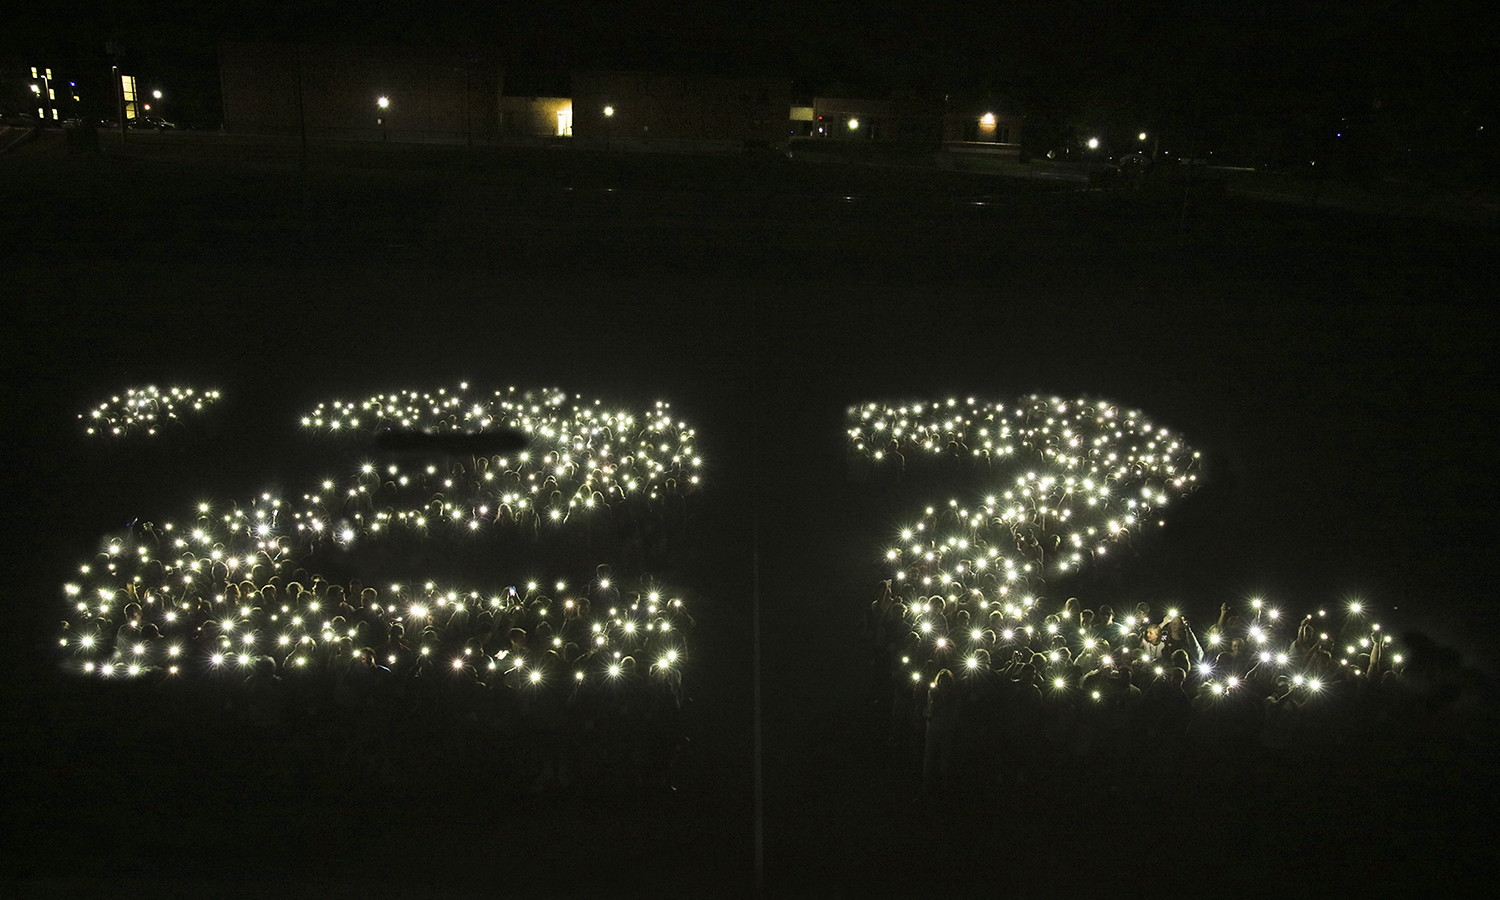 On the eve of Commencement, we look back at memorable moments from the Classes of 2022's four years on campus. Here, students gather for an illumination photo during Orientation.